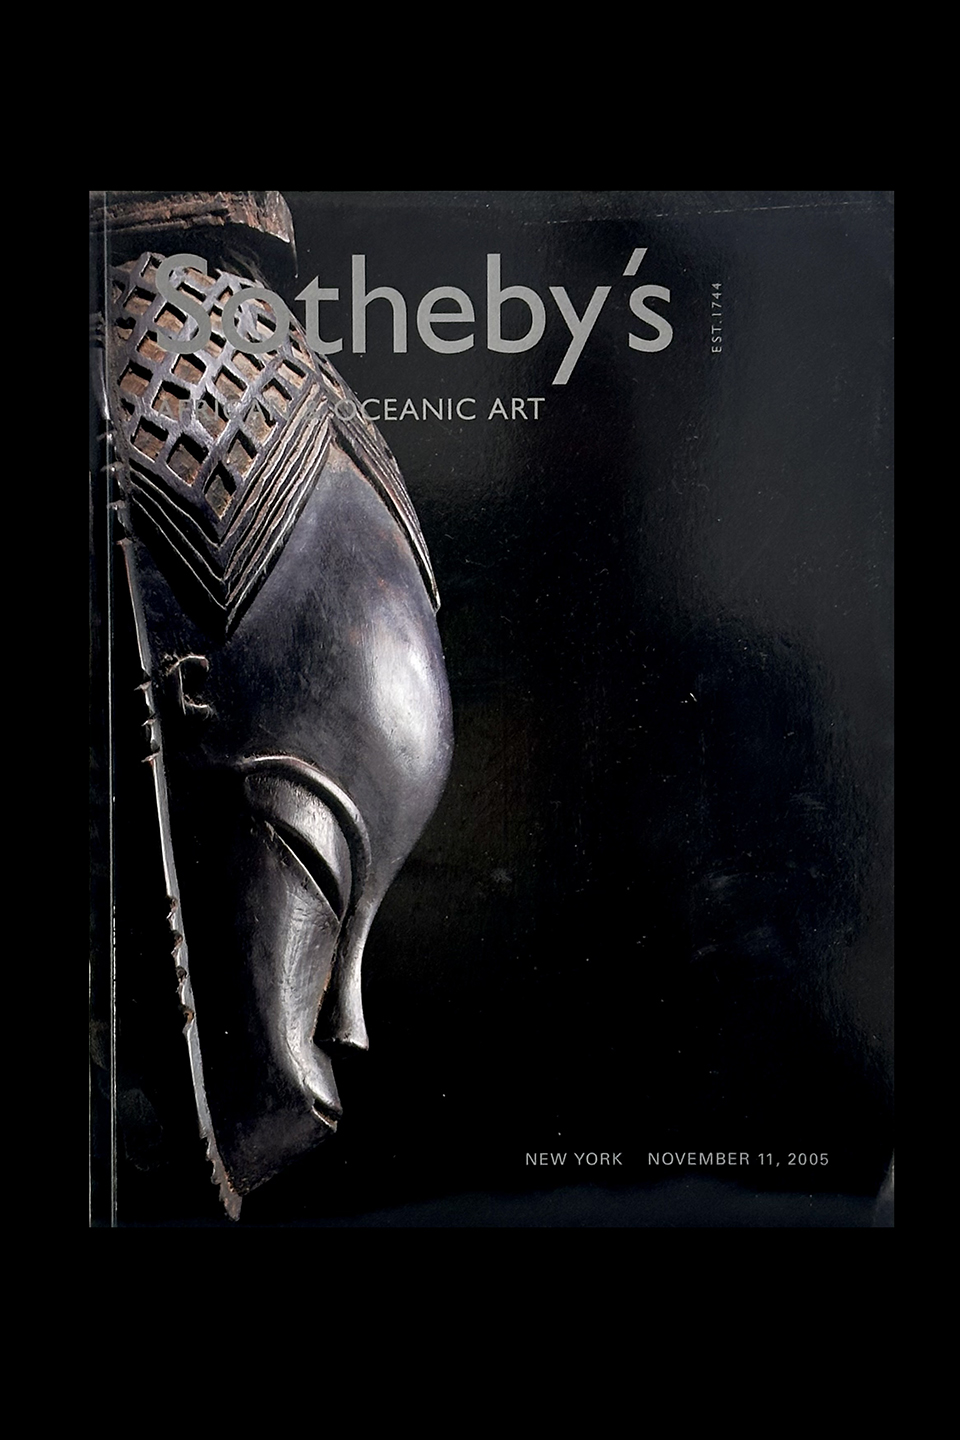  Sotheby's - African and Oceanic Art - New York, November, 2005